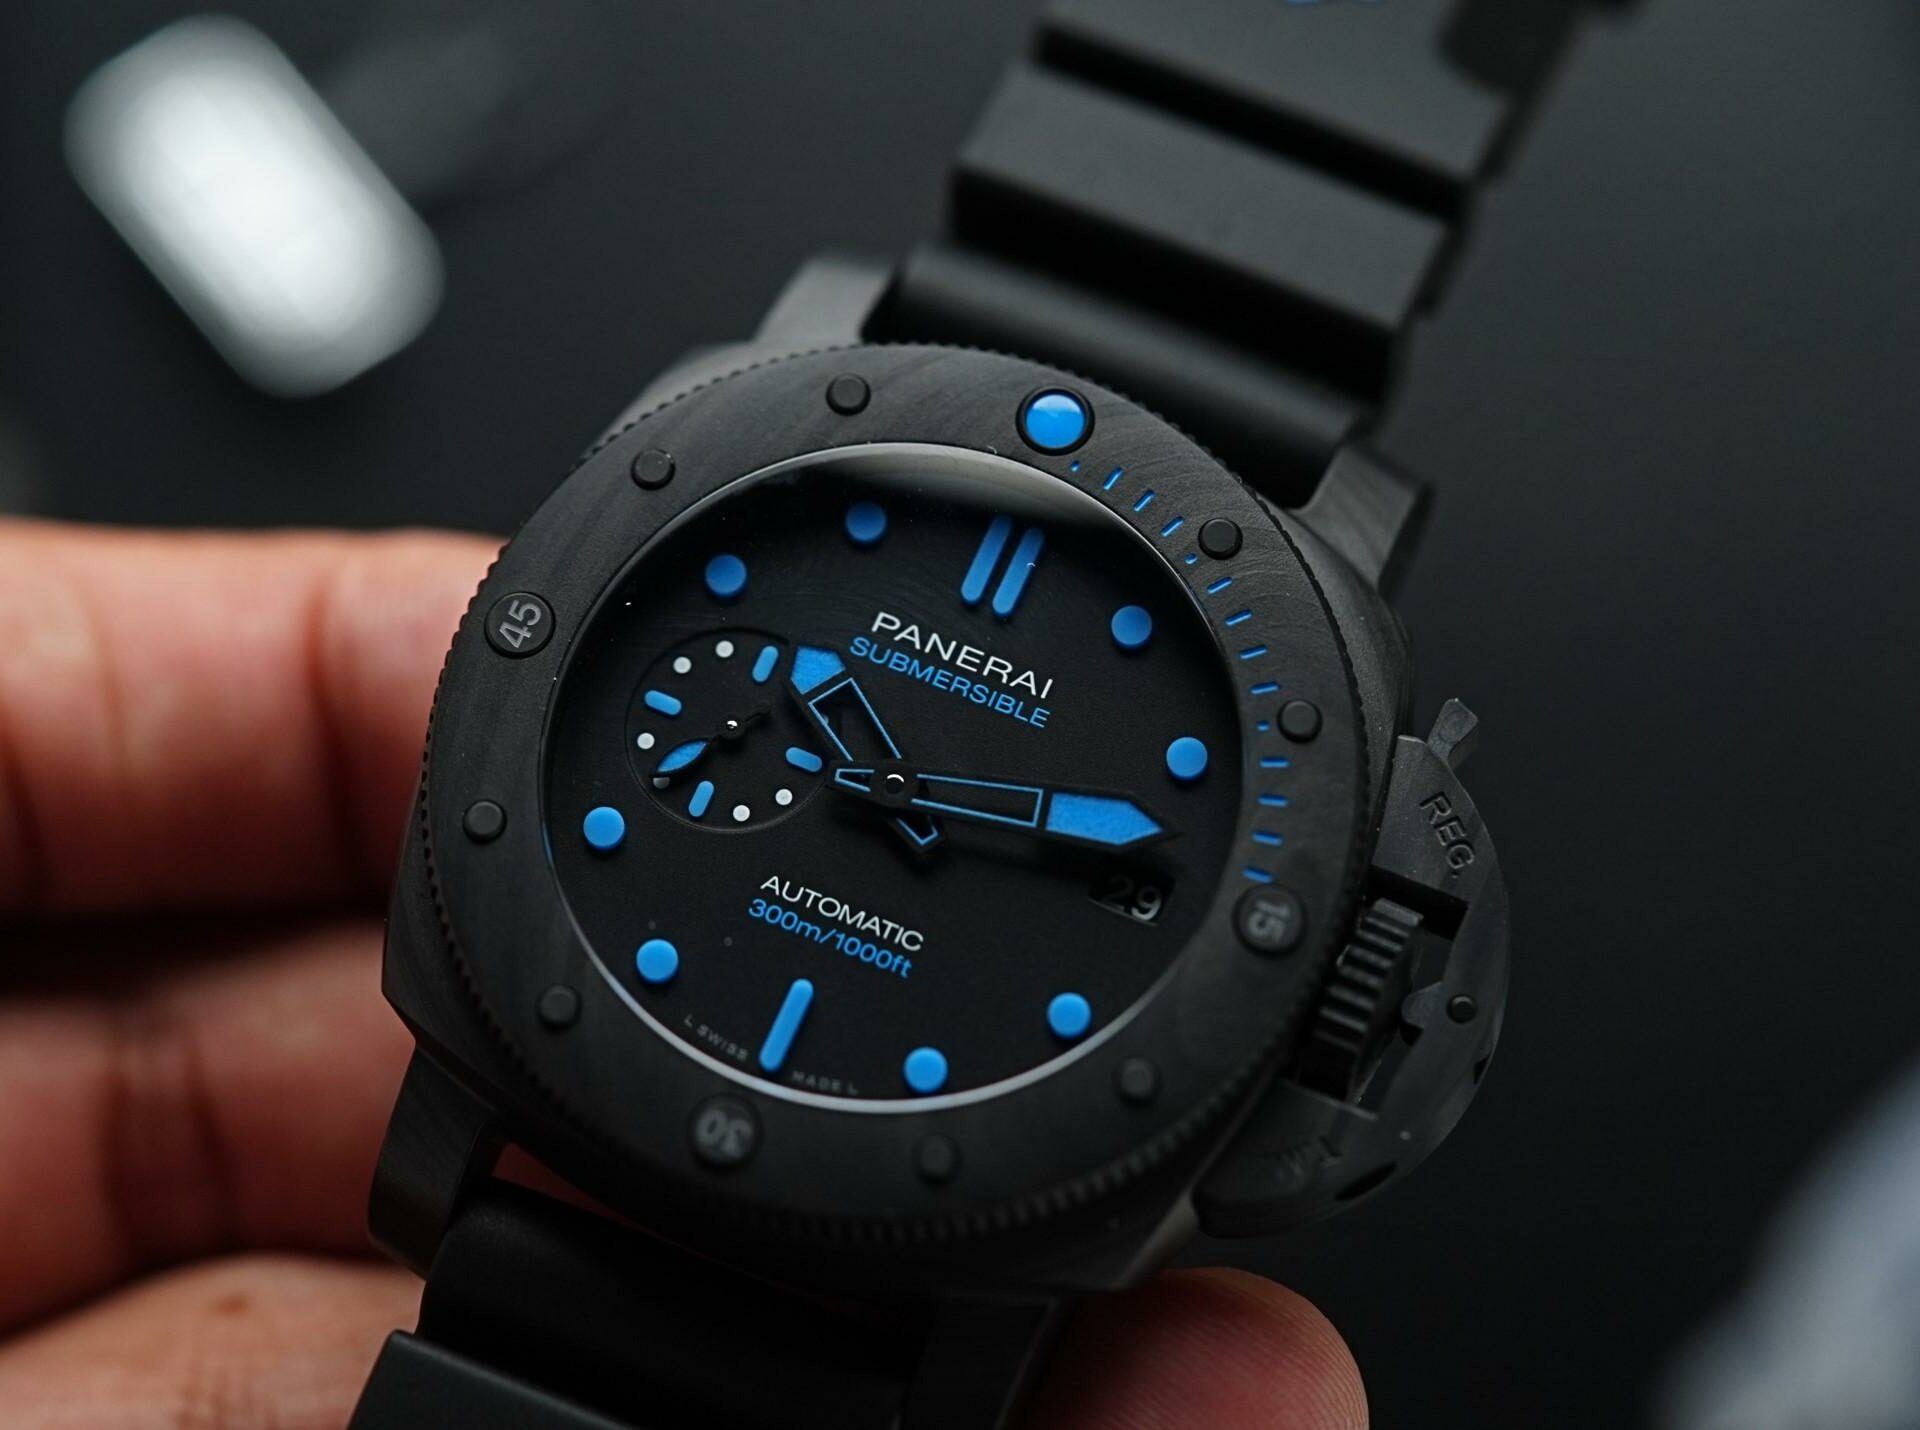 Panerai Submersible Carbotech PAM960 held in hand.